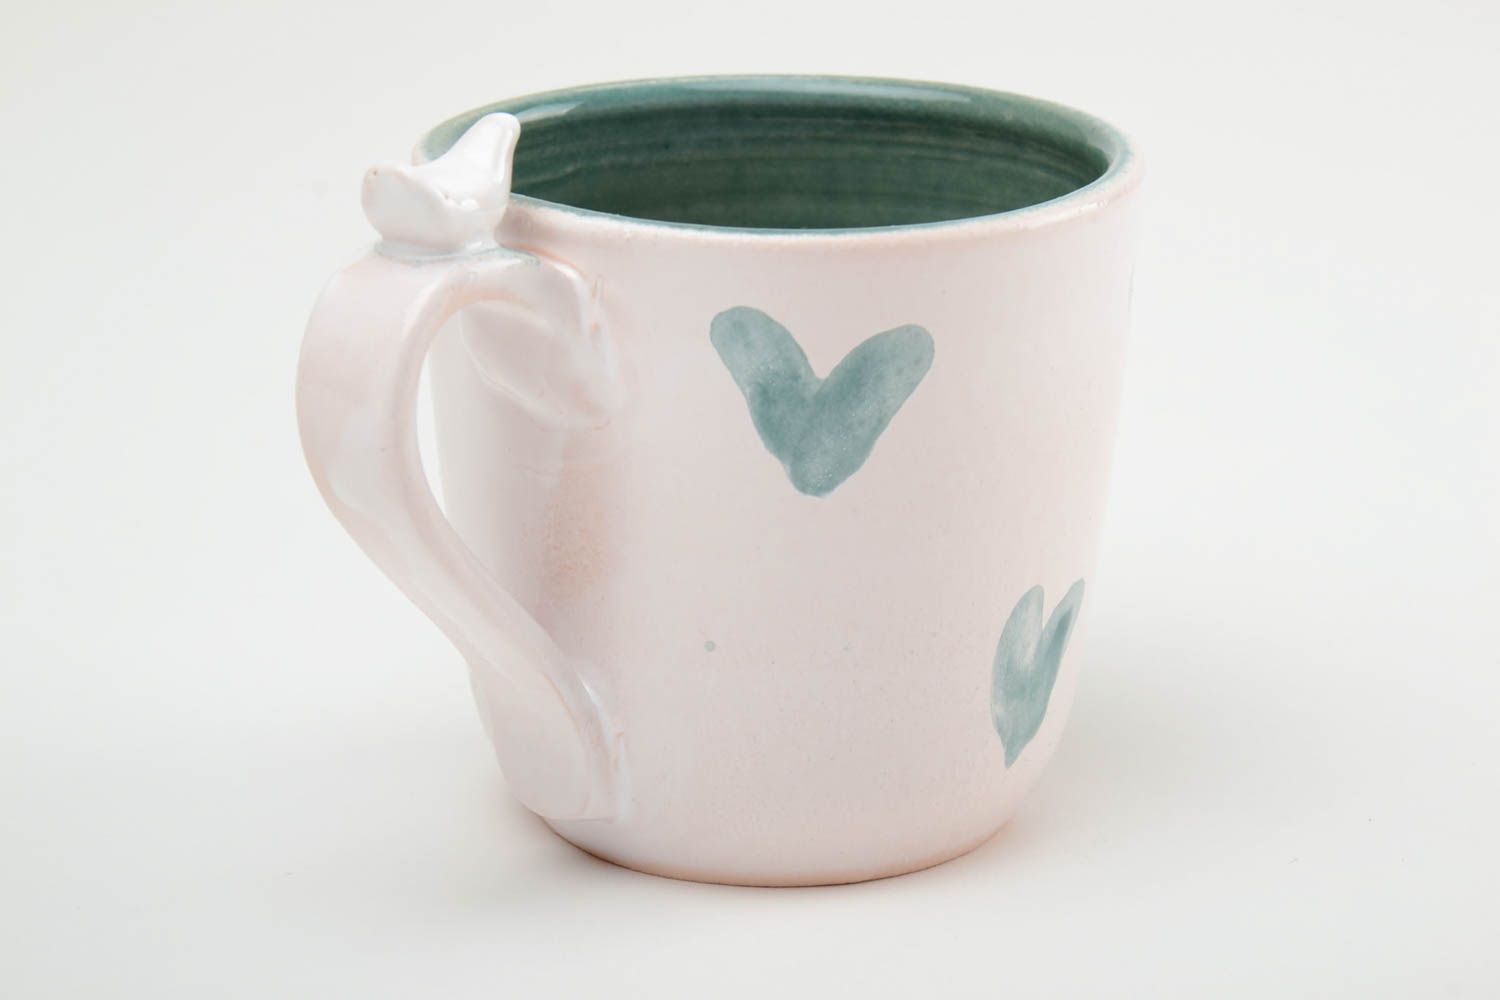 10 oz white and green ceramic cup with handle and green hearts' pattern photo 4